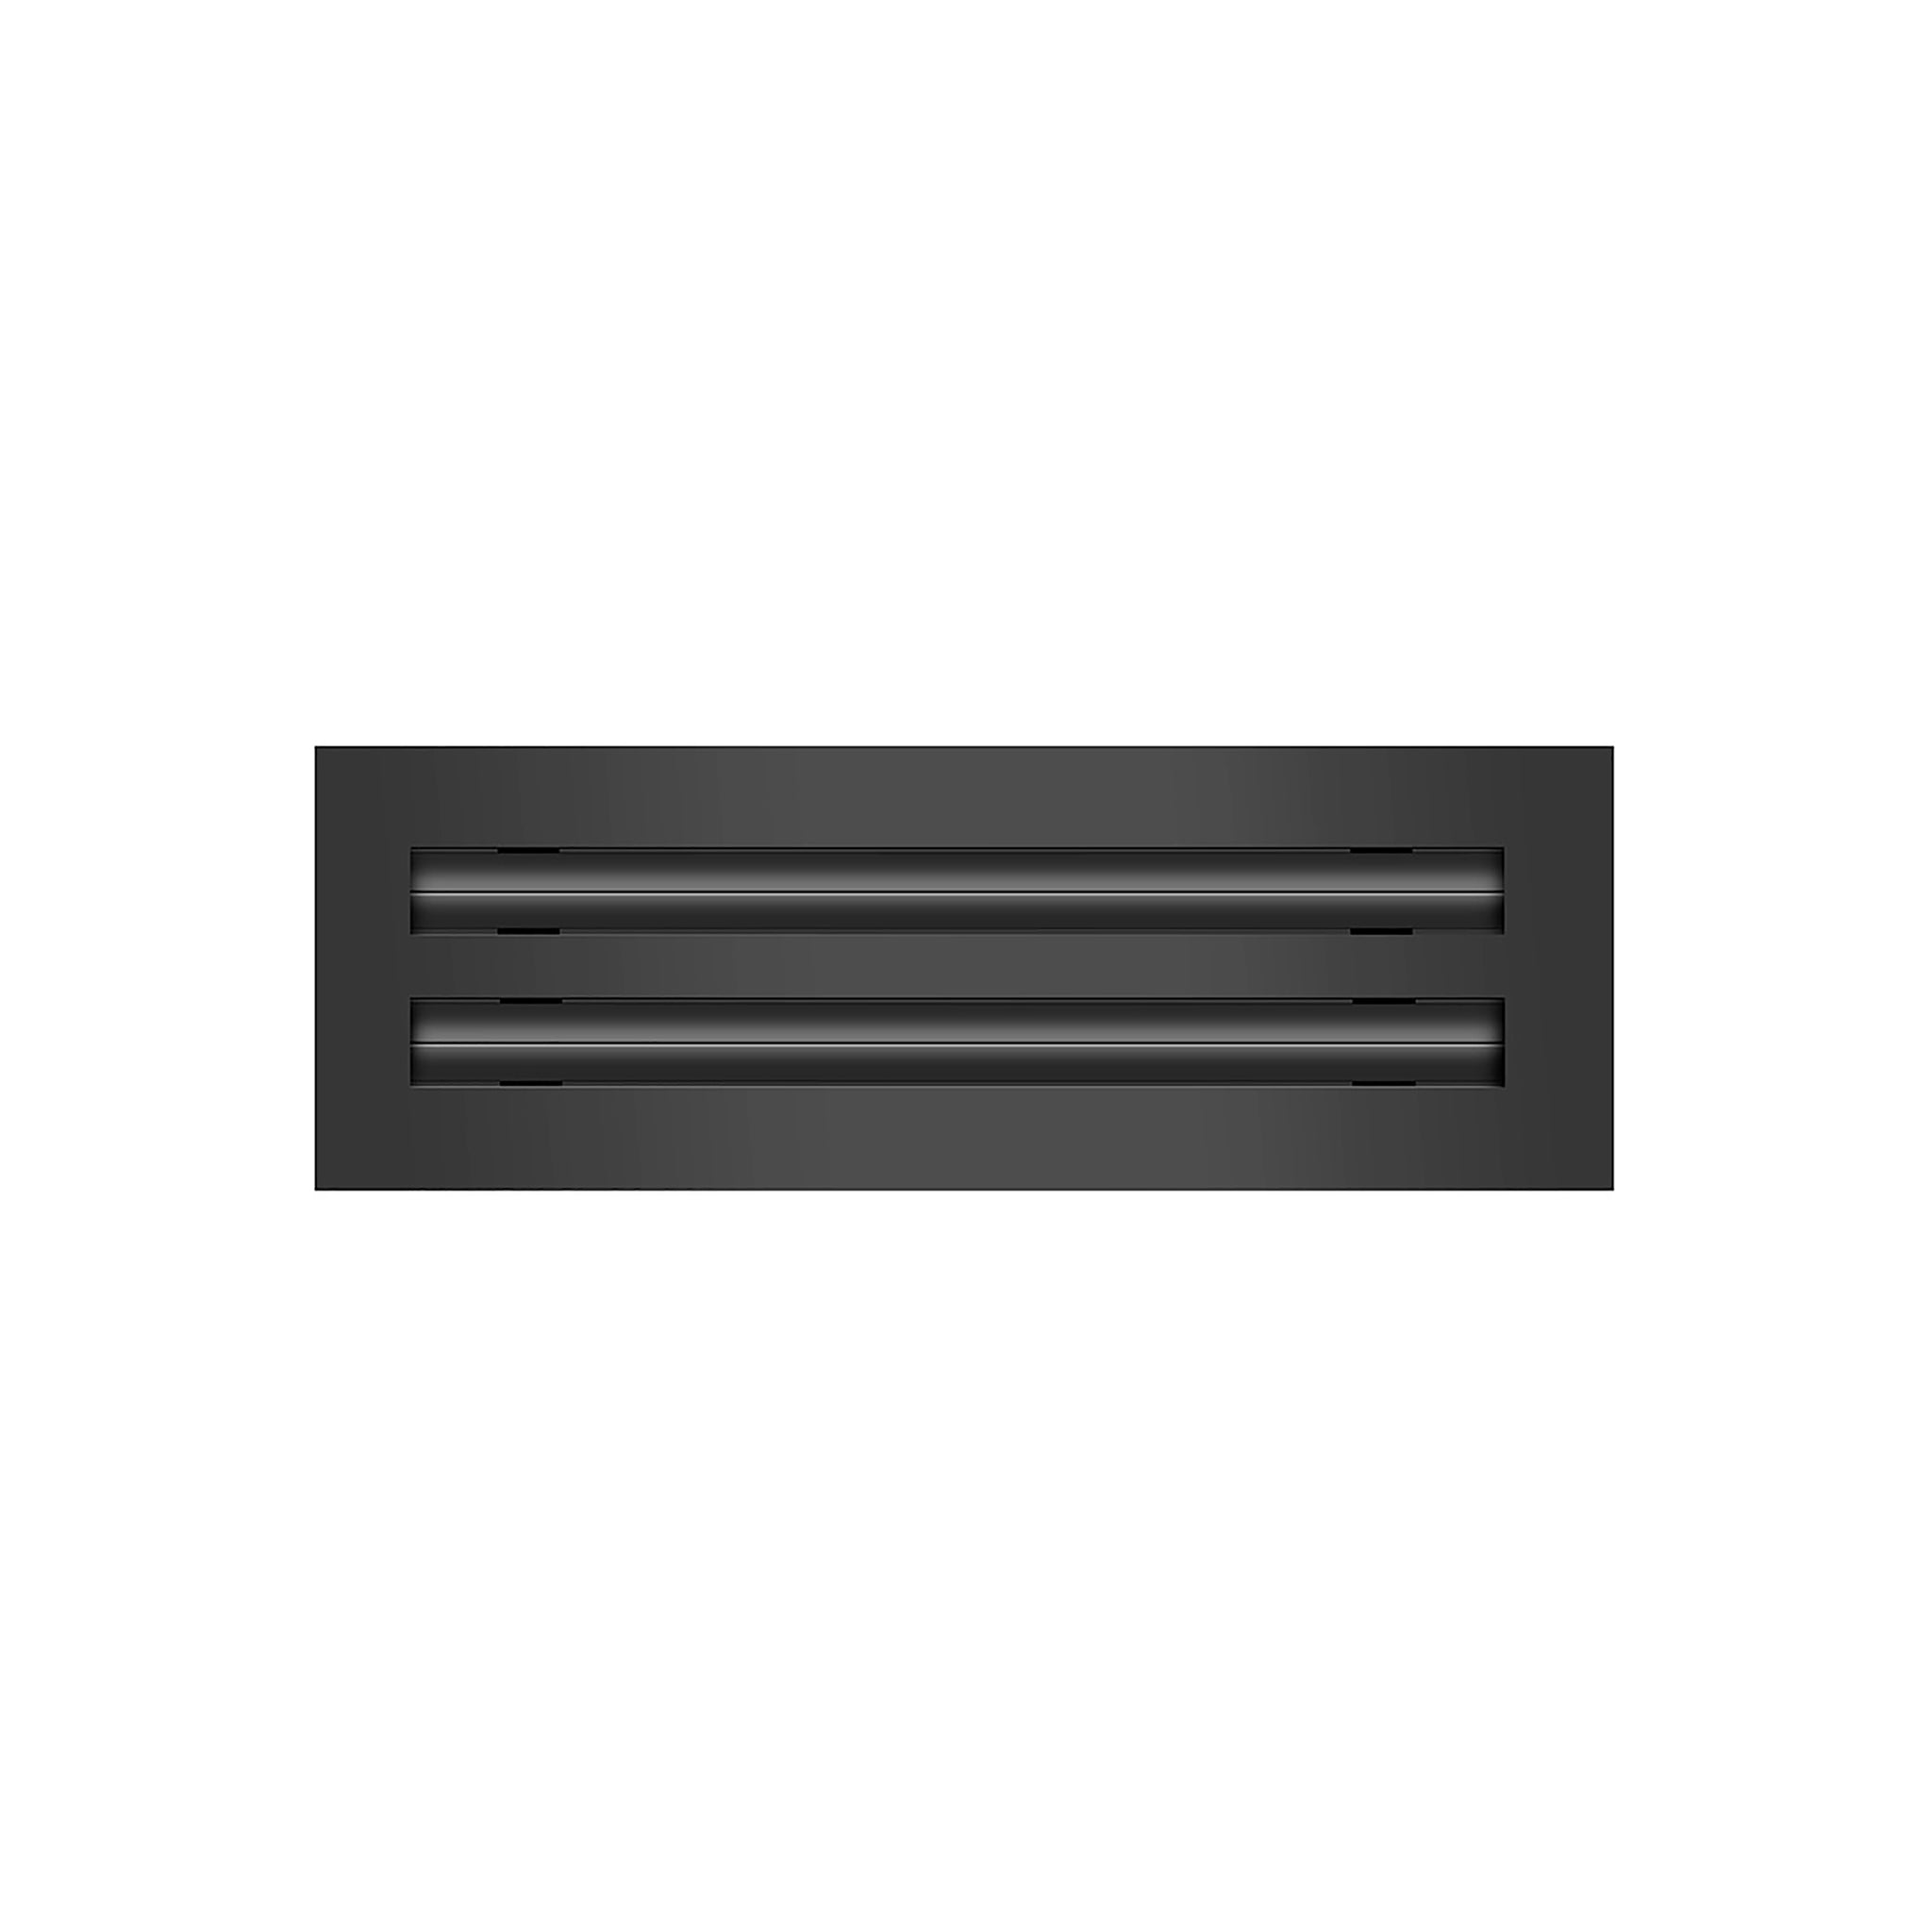 Front of 12 Inch 2 Slot Linear Air Vent Cover Black - 12 Inch 2 Slot Linear Diffuser Black - Texas Buildmart